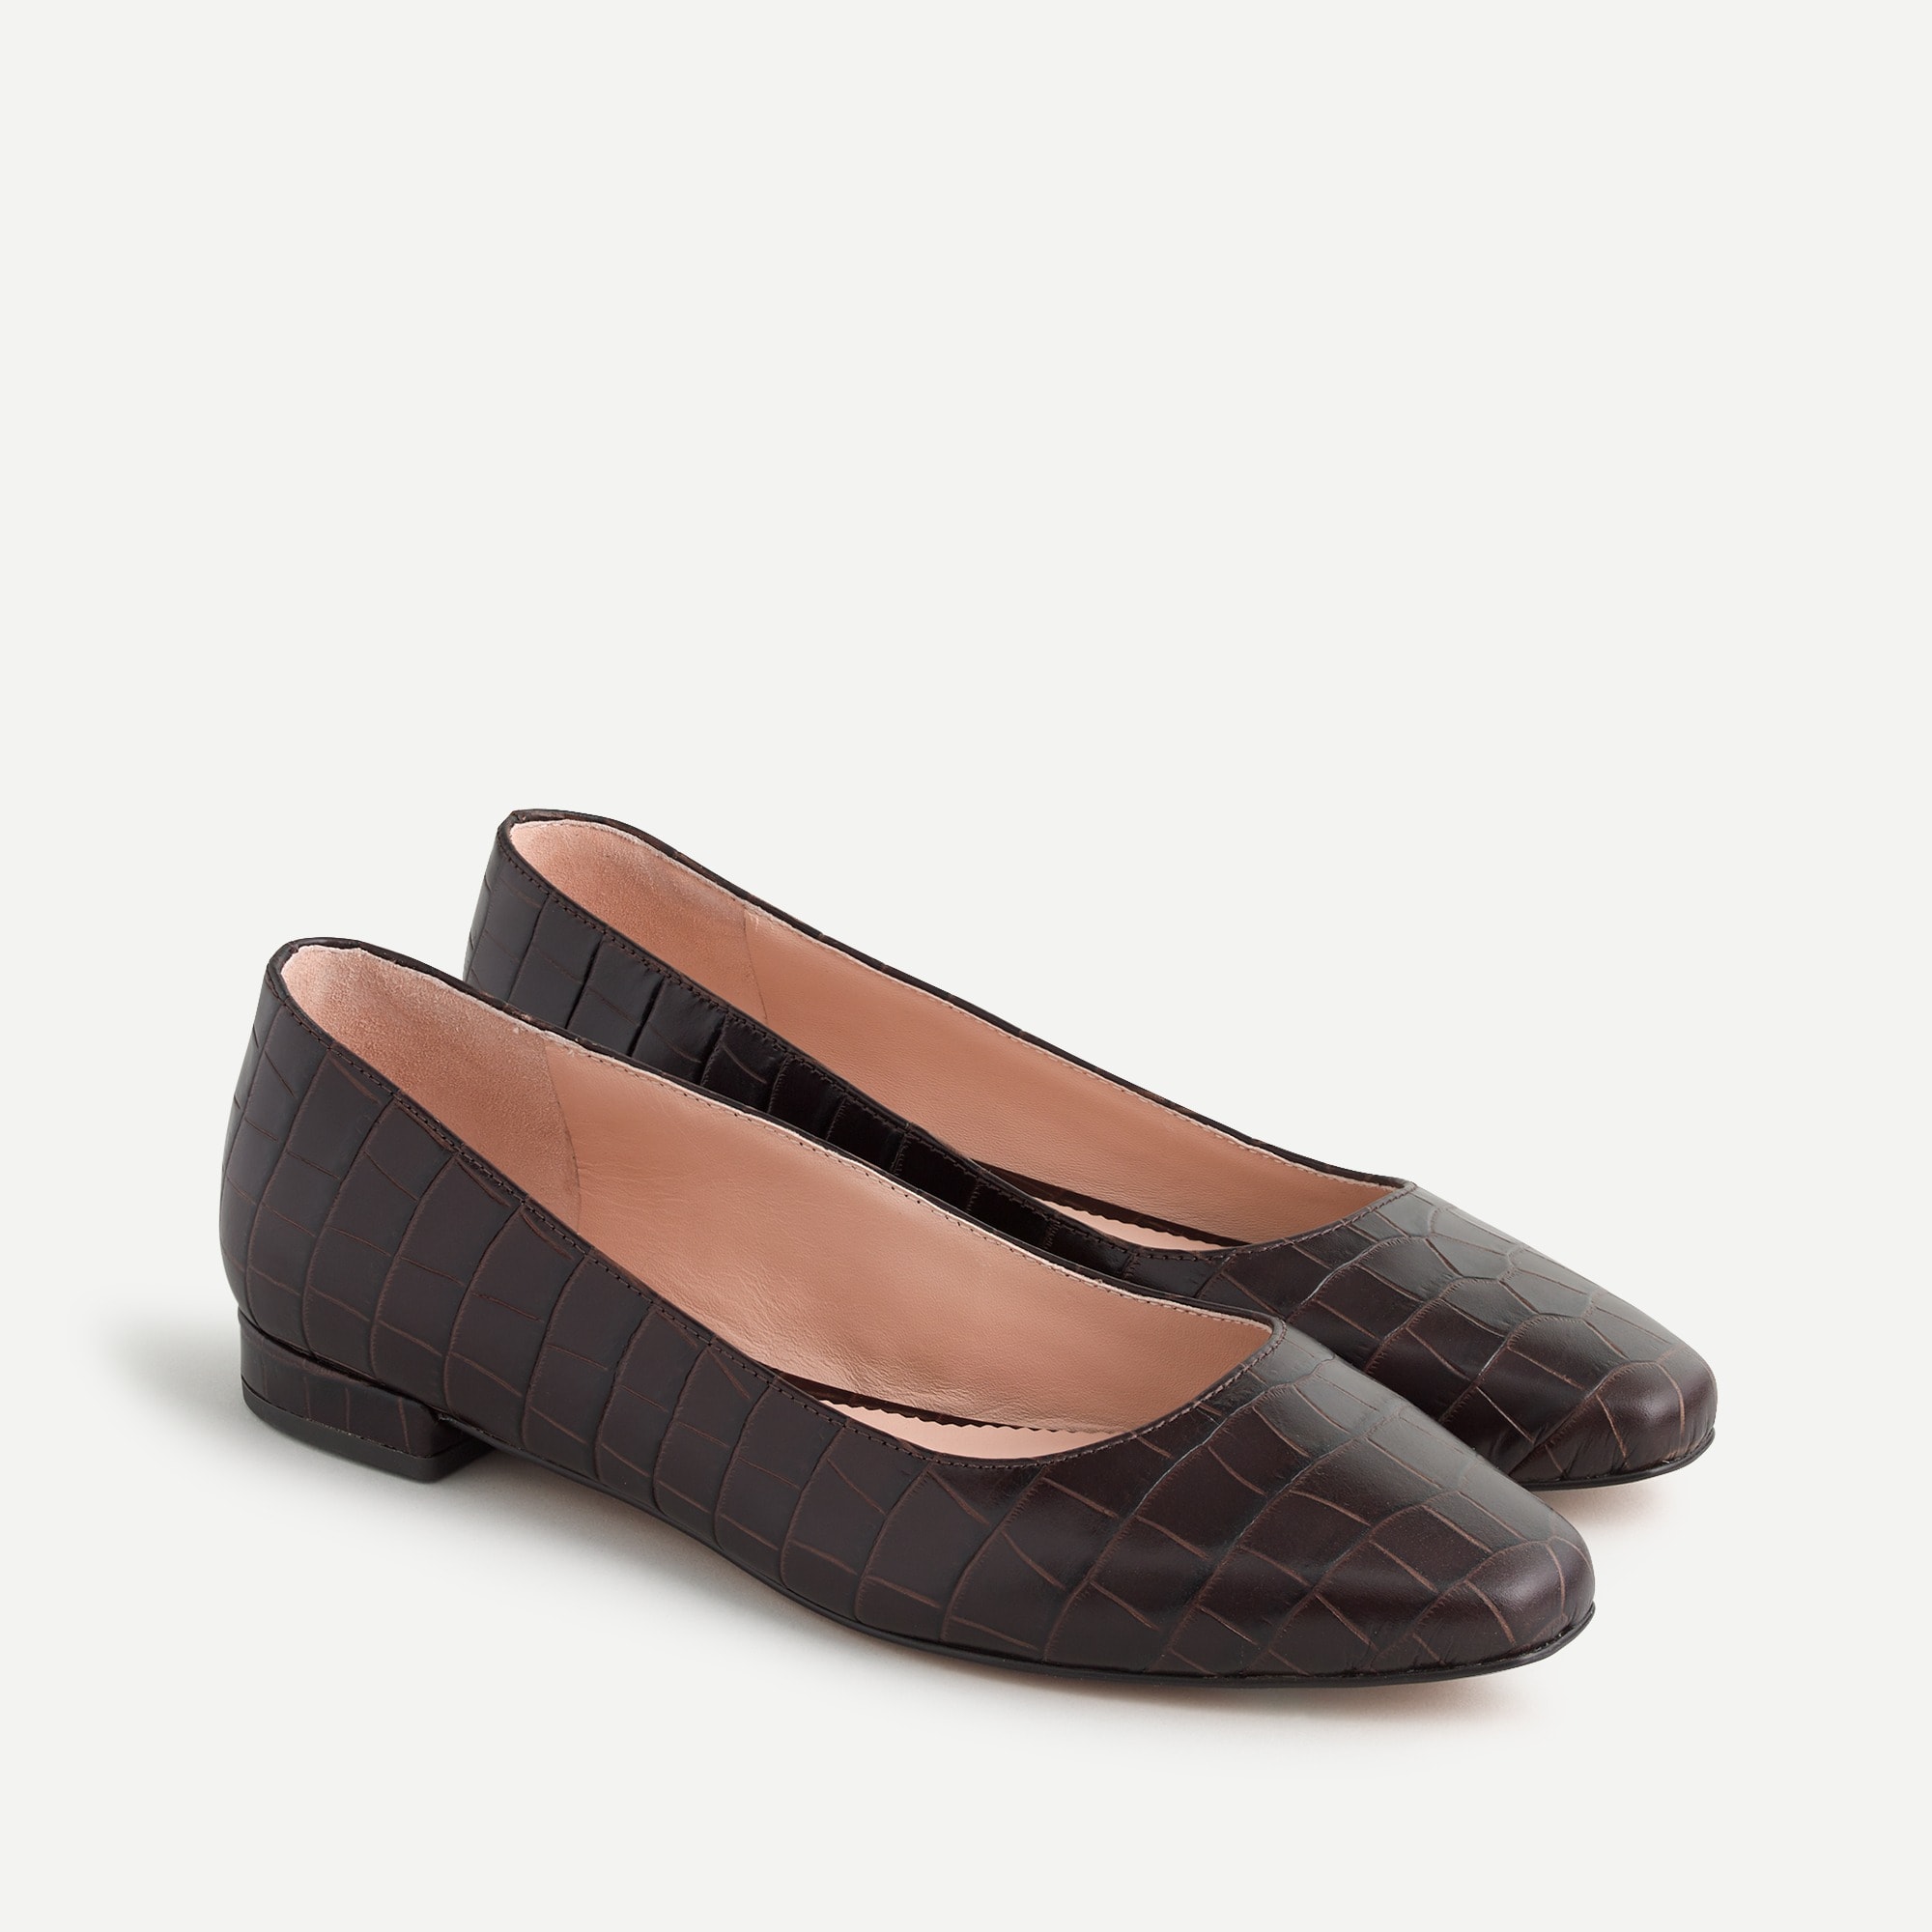 J.Crew: Carolyn Skimmer Flats In Croc-embossed Leather For Women